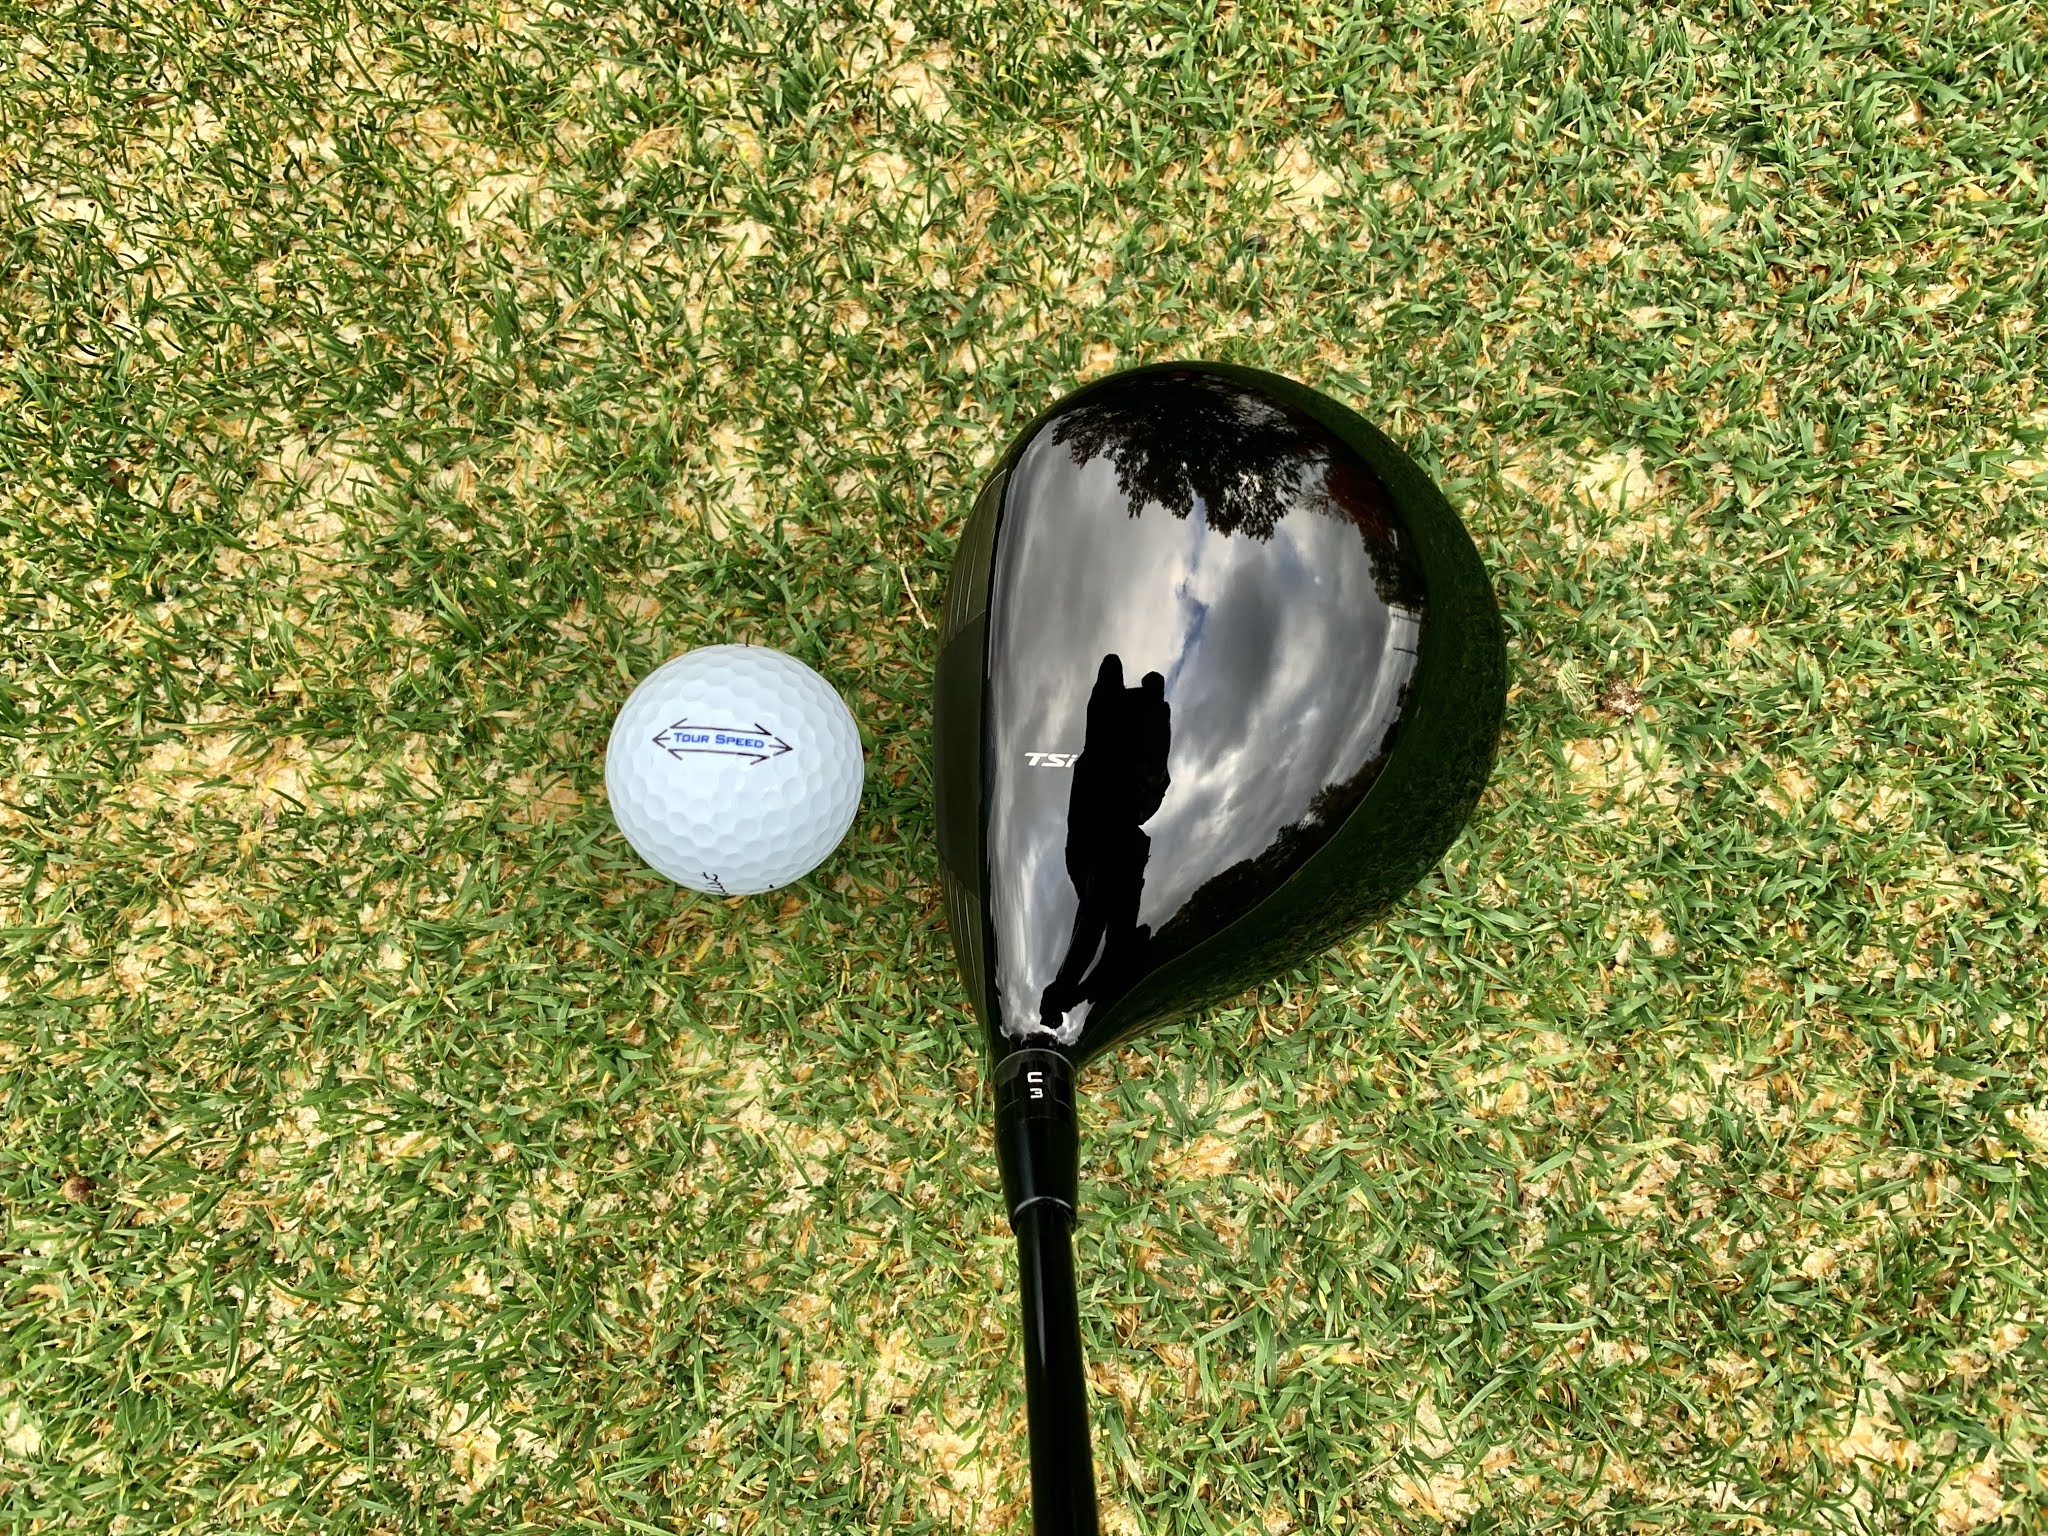 titleist tsi3 driver review